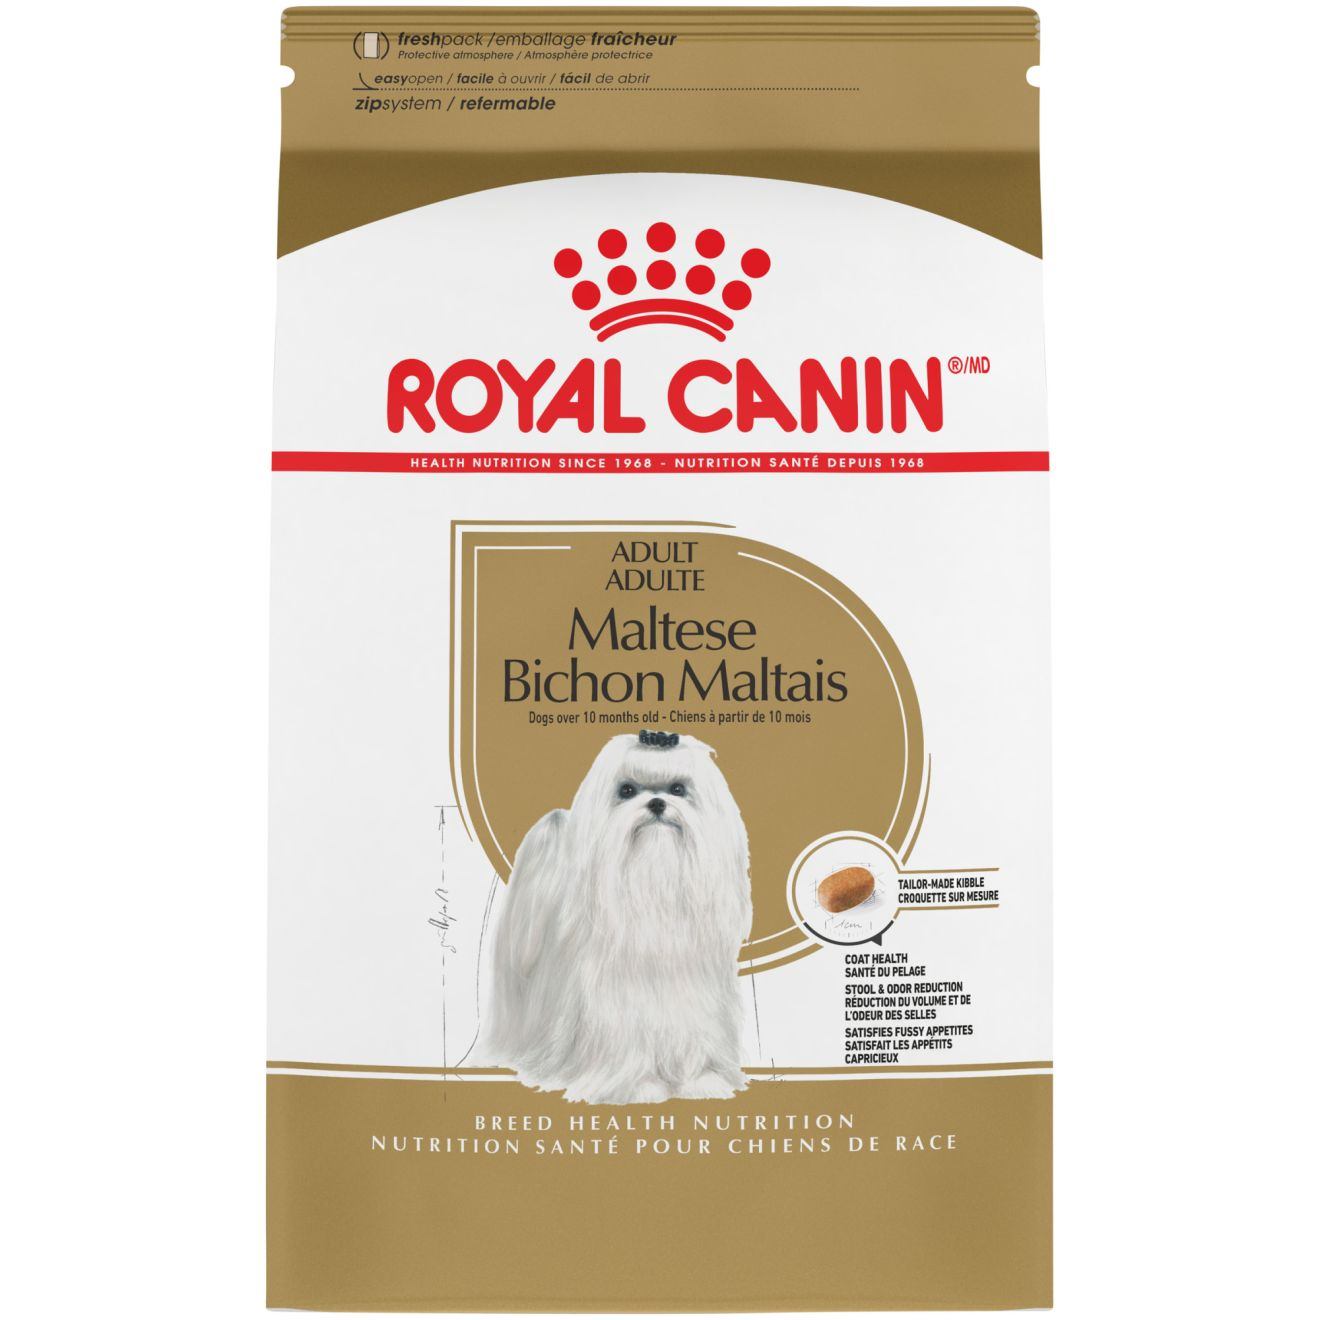 what is the best dog food for maltese?